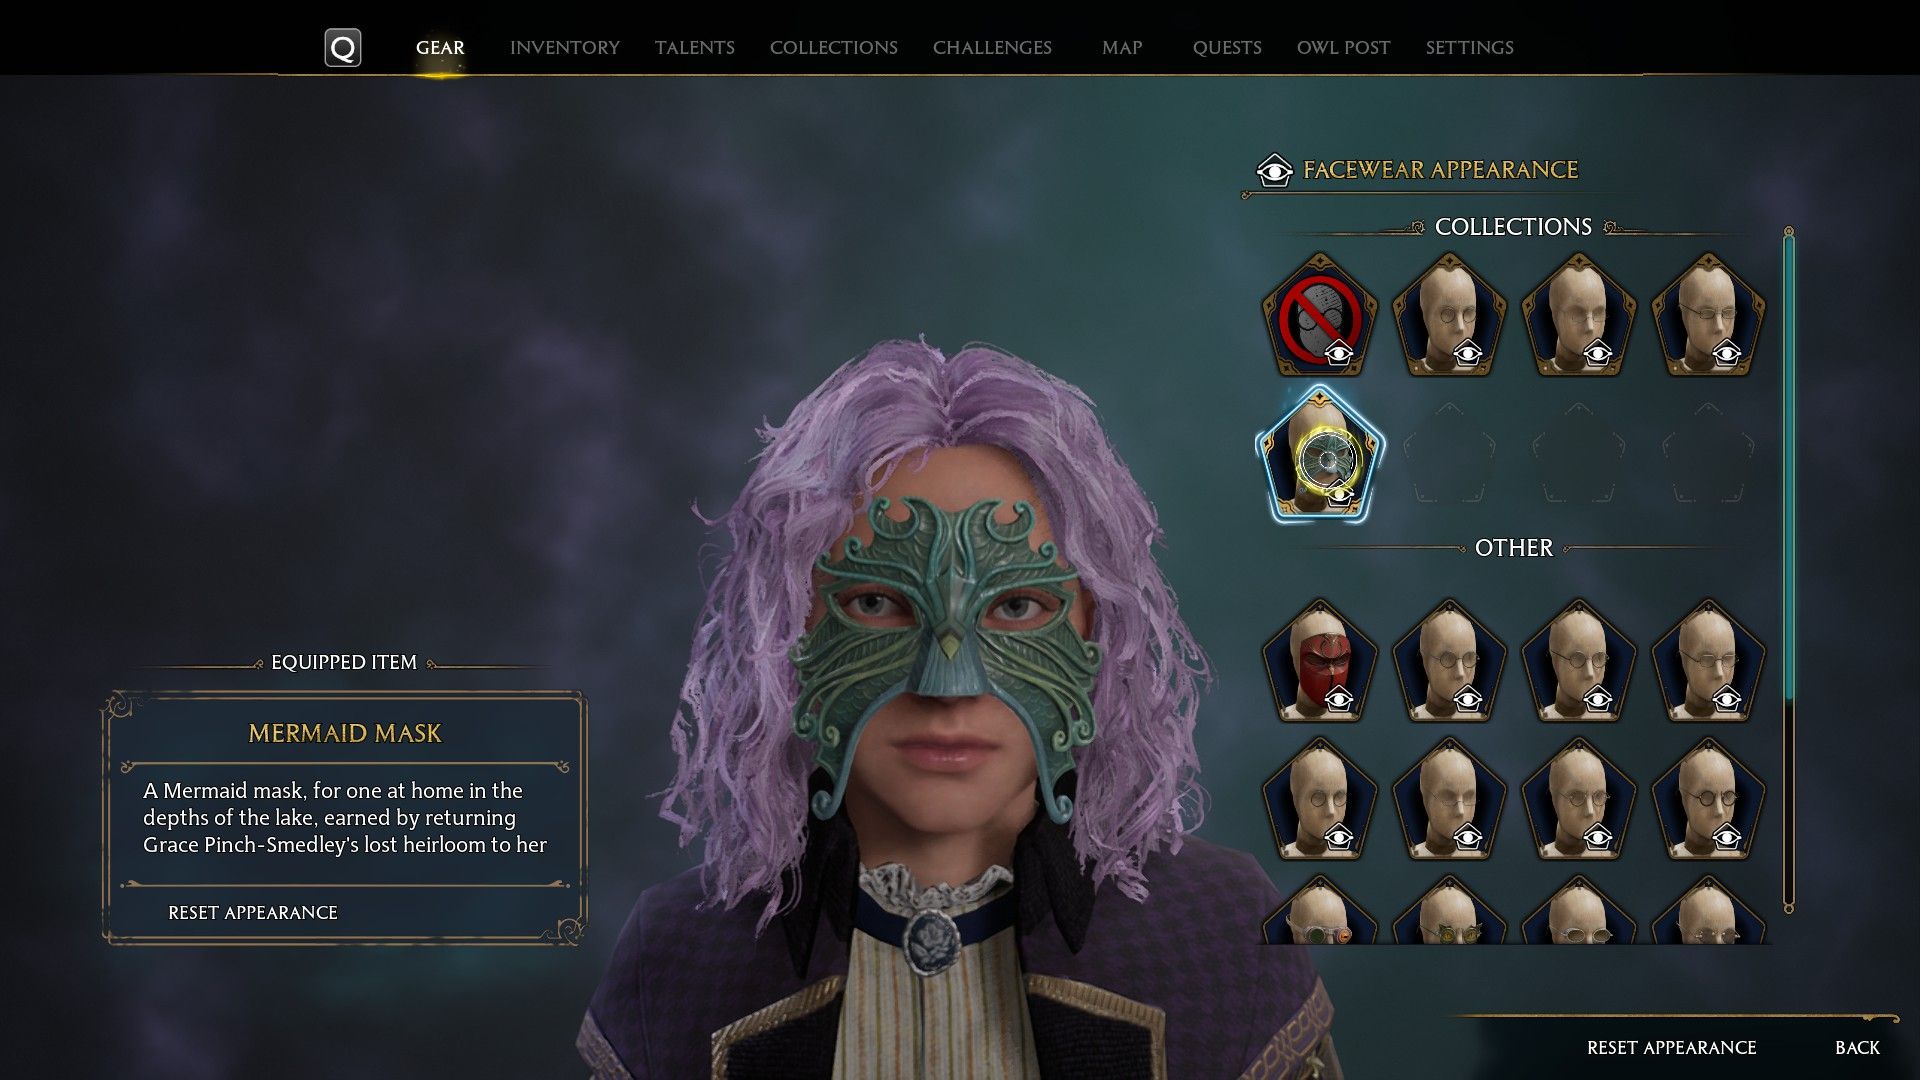 Mermaid Mask Reward for The Lost Astrolabe Quest